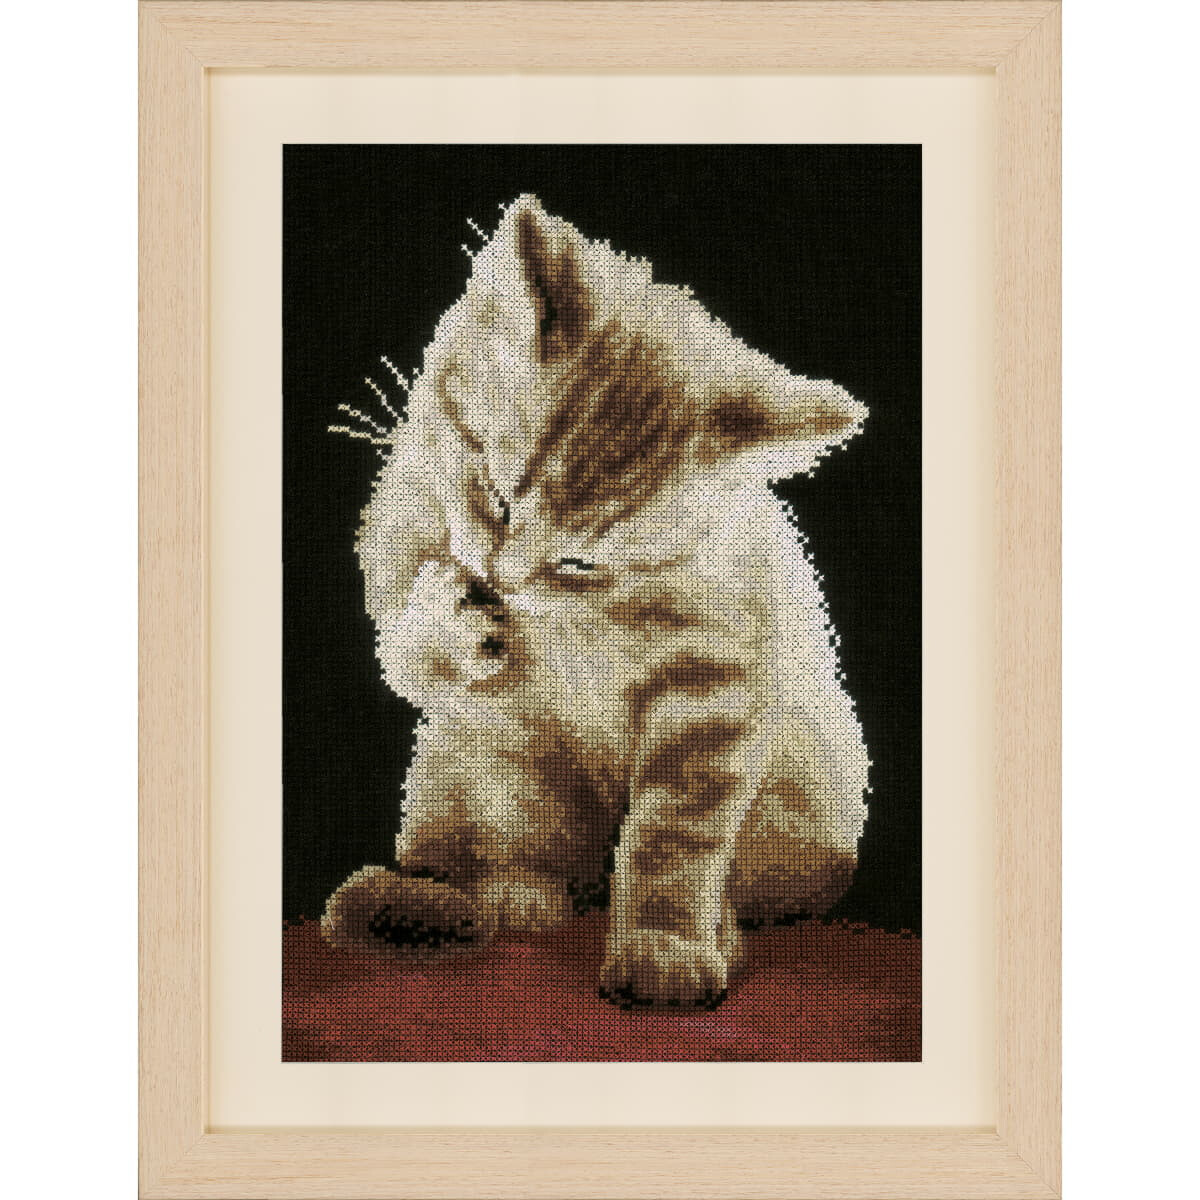 Vervaco counted cross stitch kit "Kitten",...